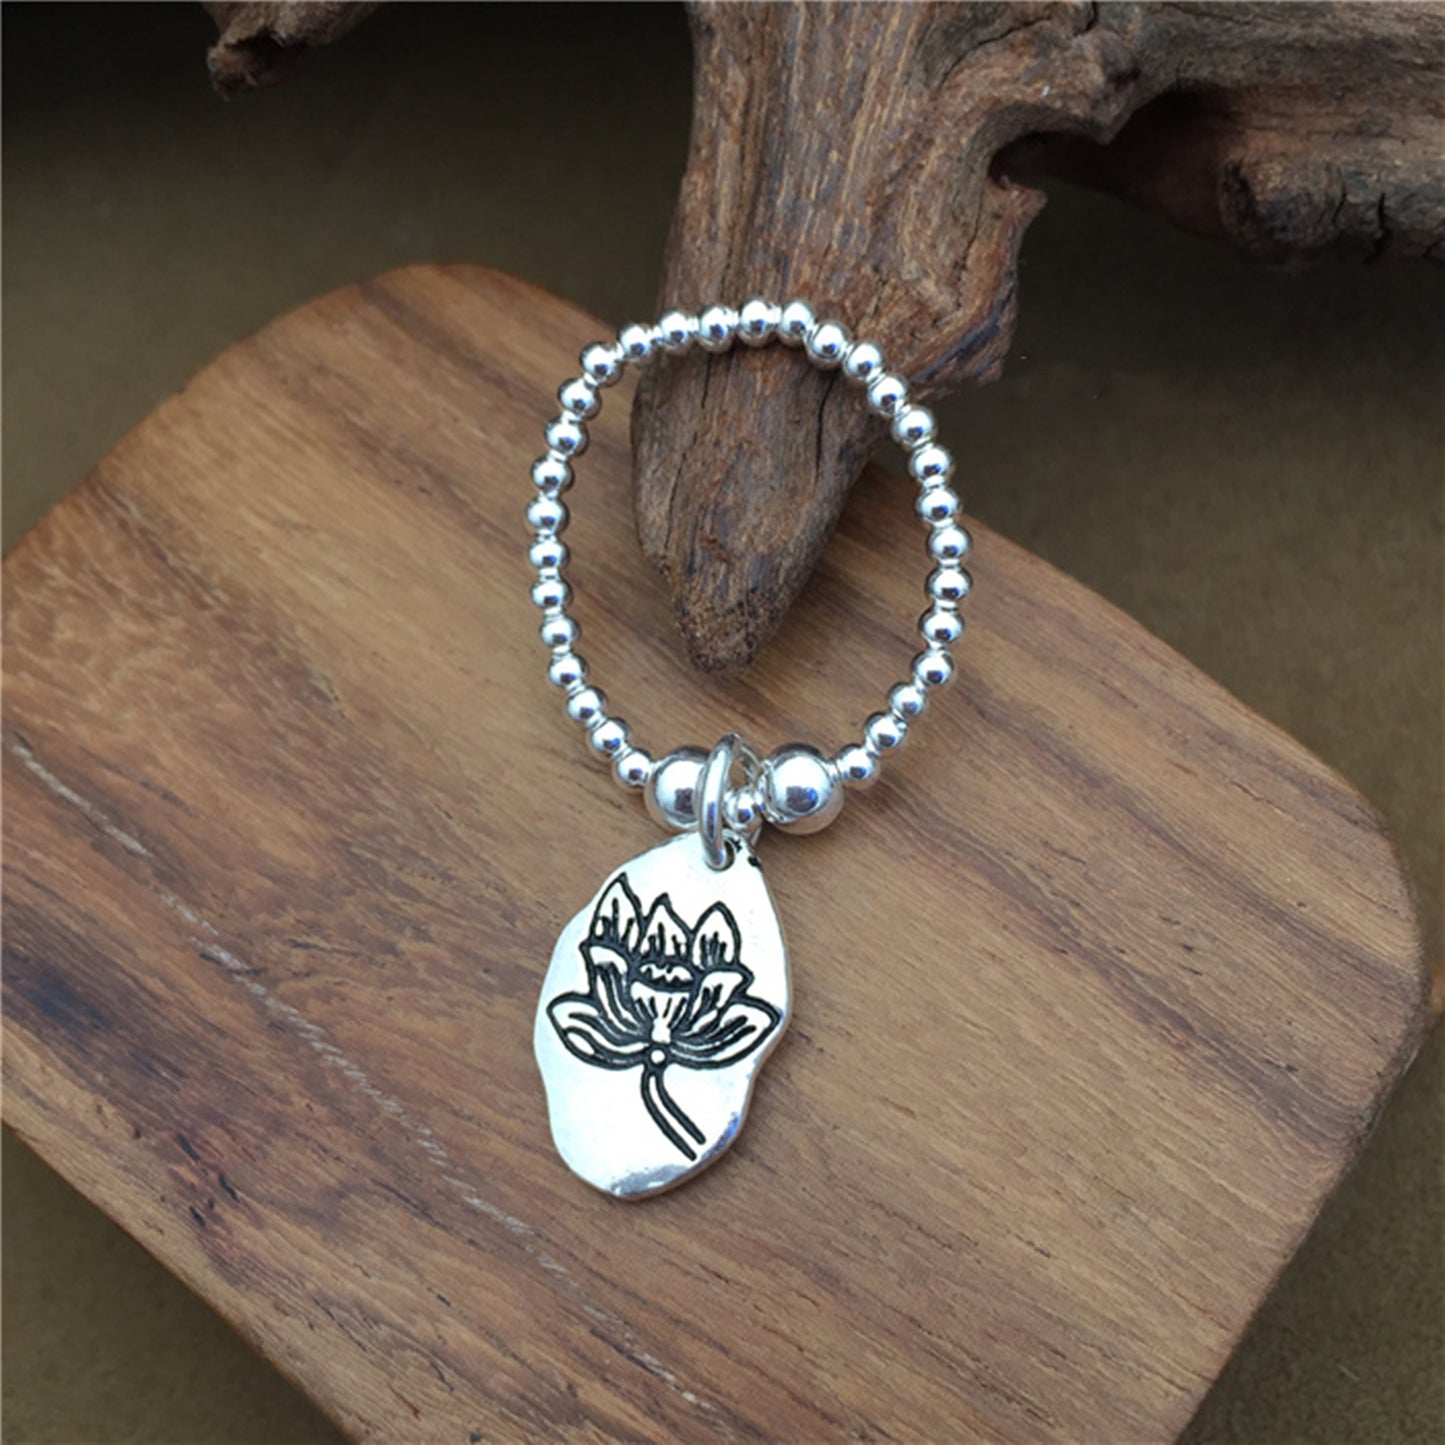 Lotus Flower Pendant Charm in Sterling Silver with Oxidized Finish - sugarkittenlondon